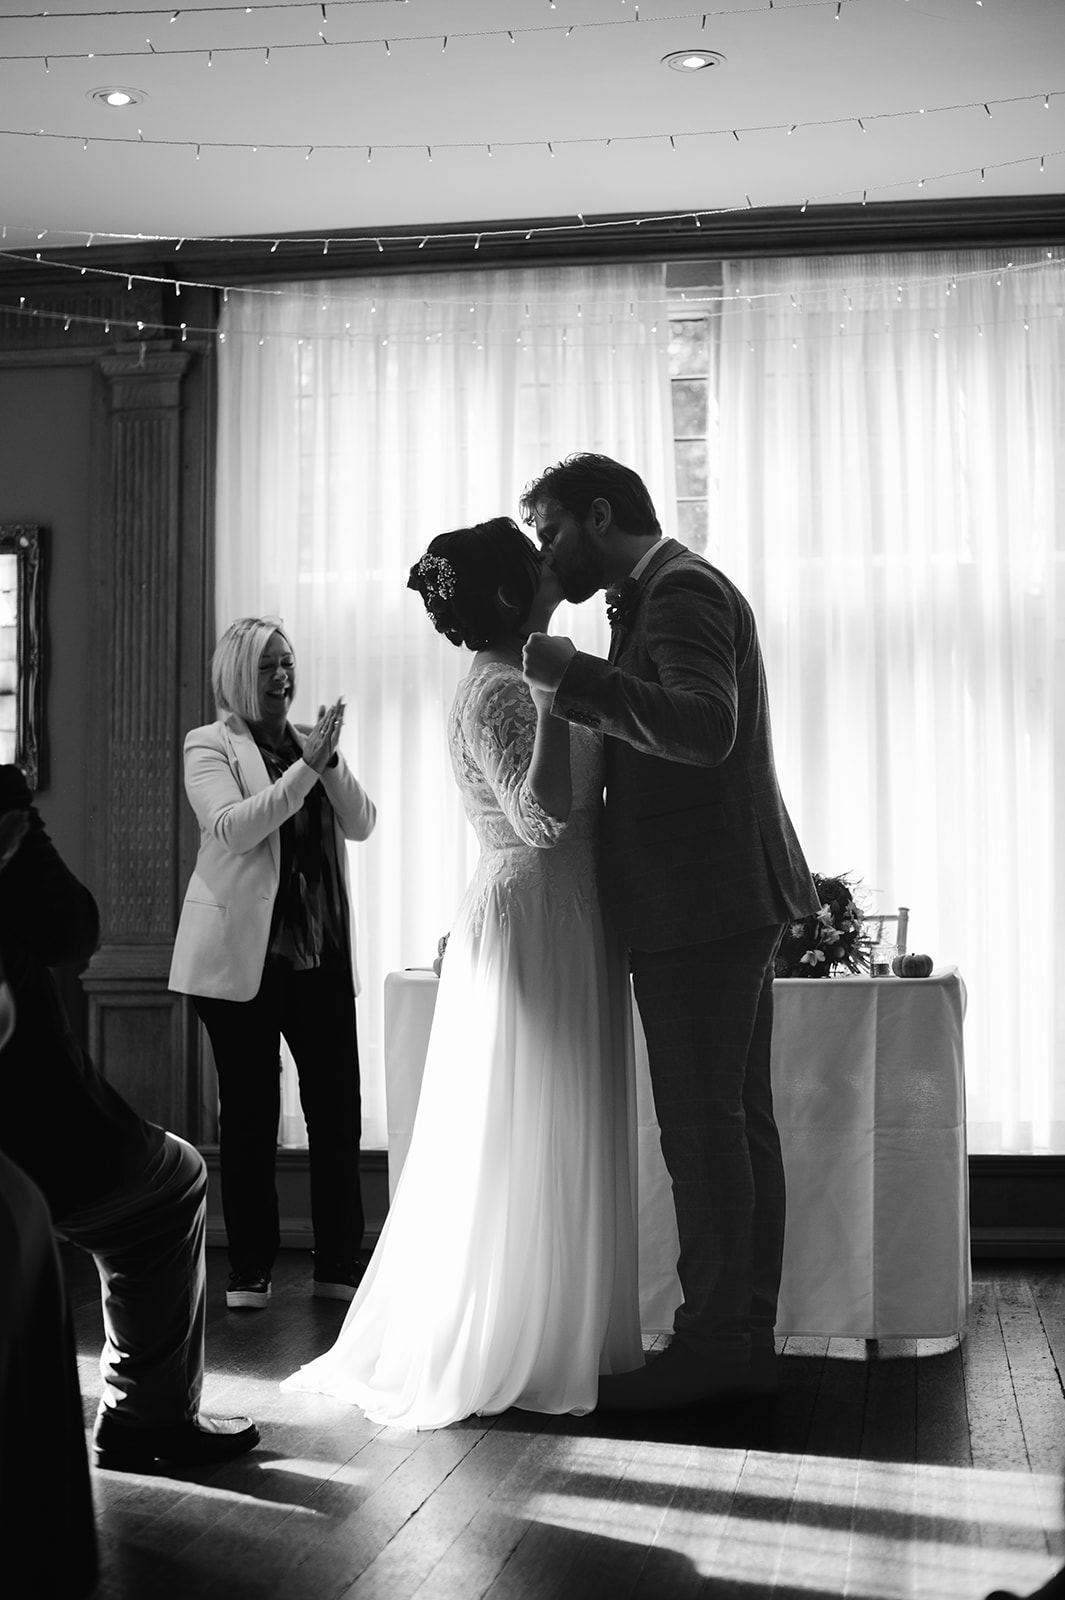 The bride and groom's first kiss in their wedding ceremony at Whirlowbrook Hall wedding in Sheffield.